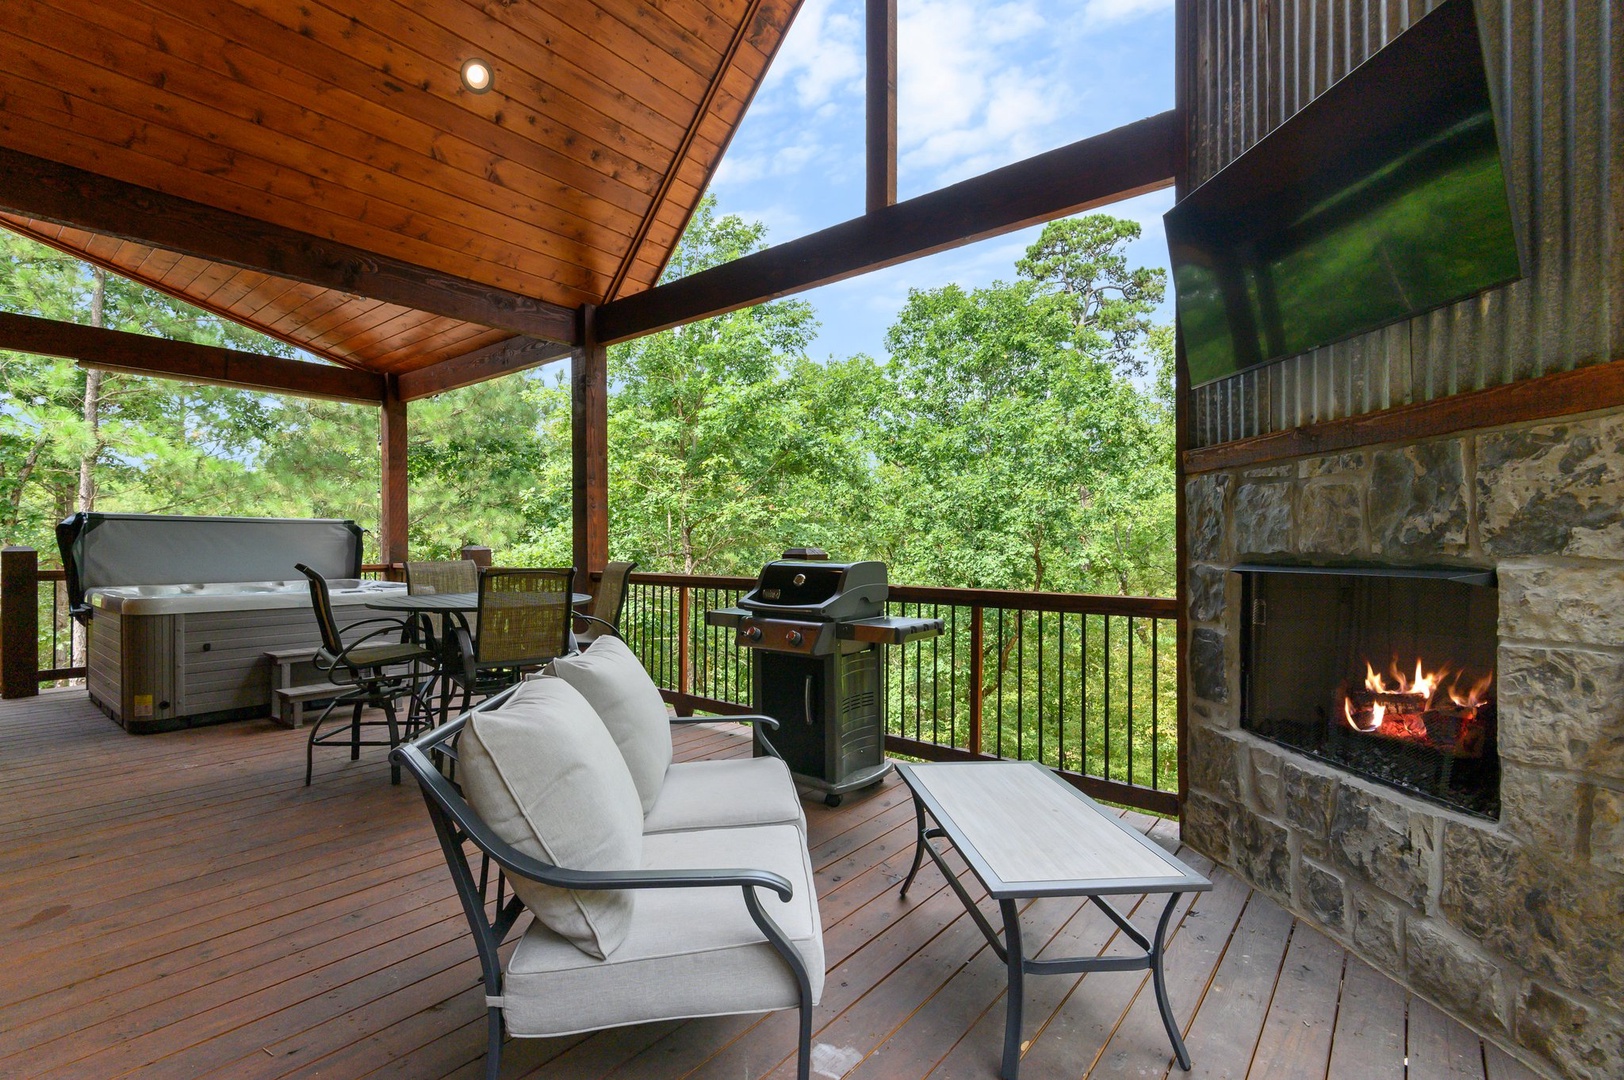 Back deck provides seating, dining, and relaxing space